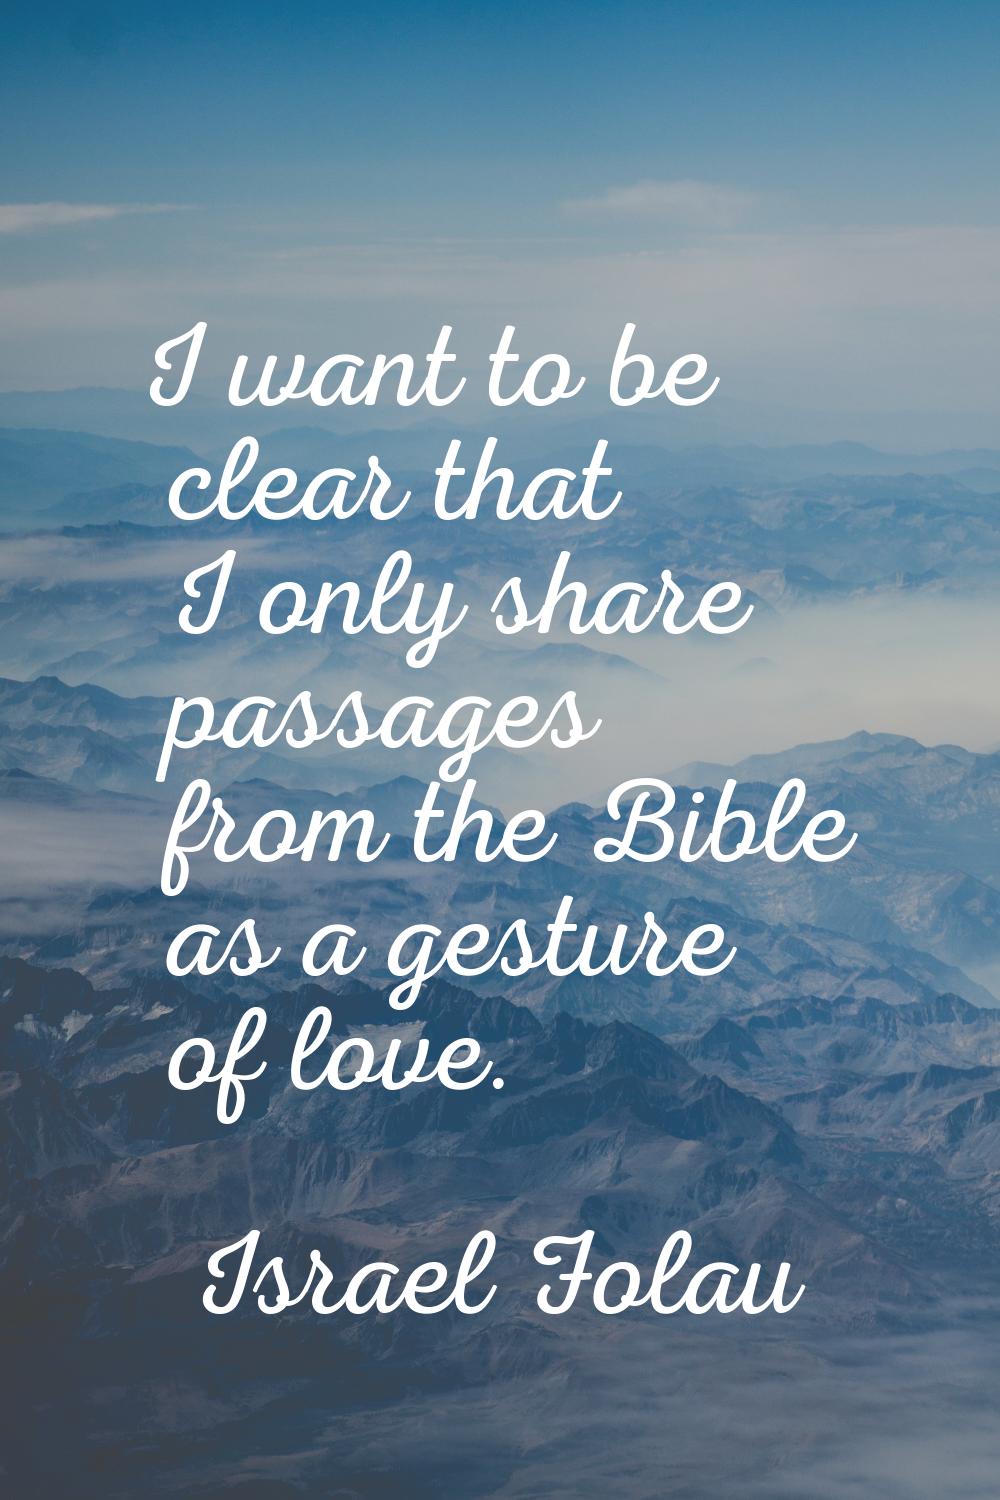 I want to be clear that I only share passages from the Bible as a gesture of love.